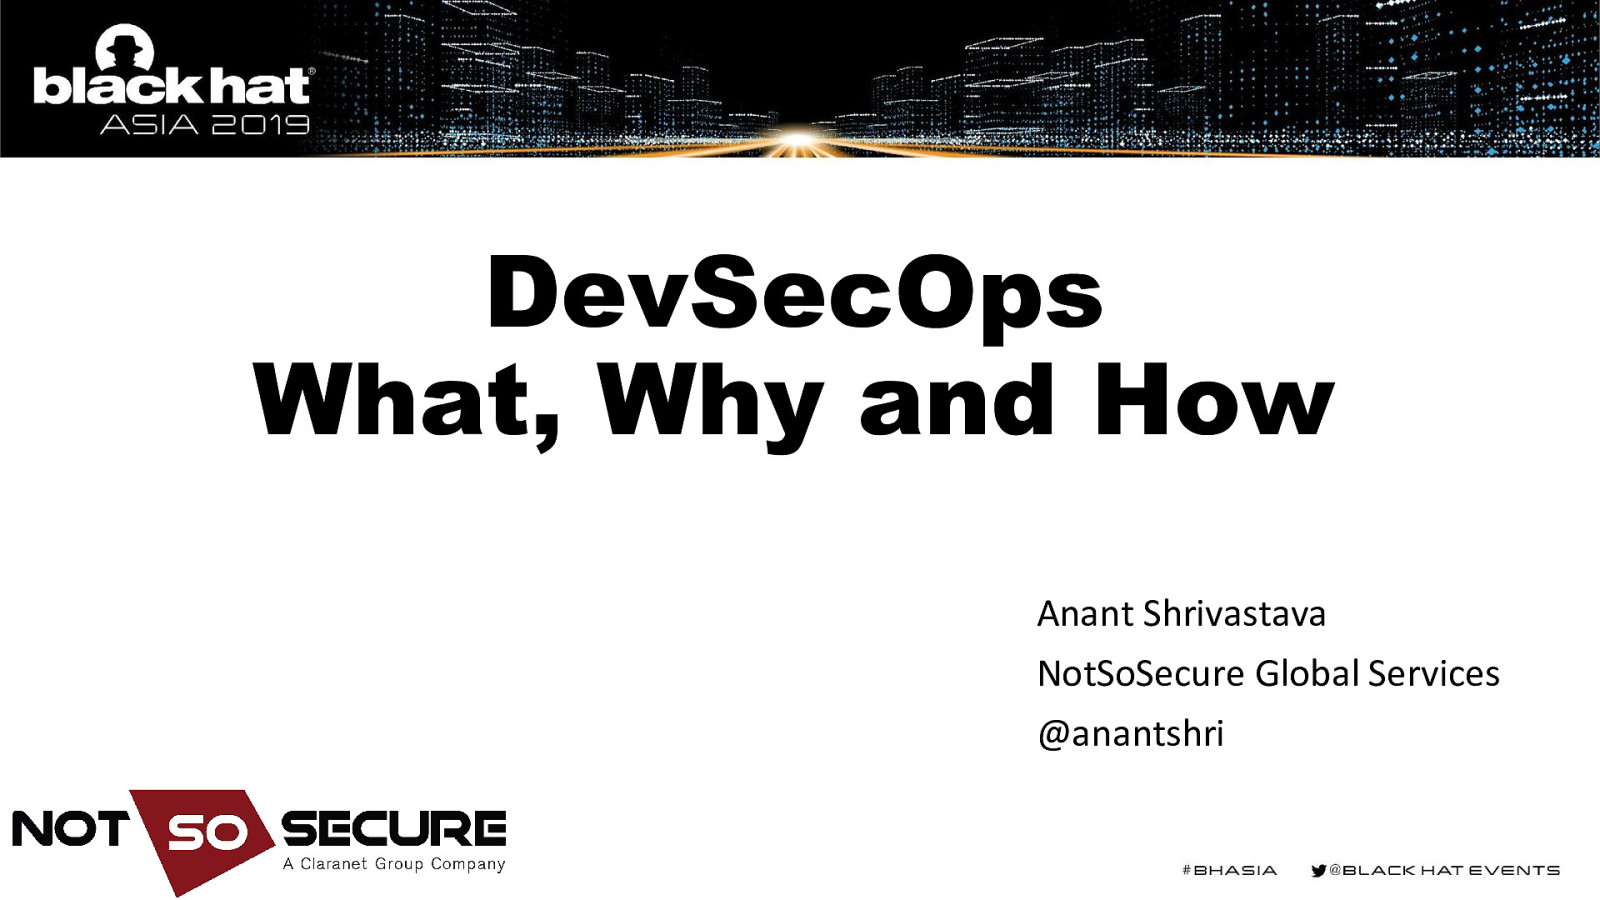 DevSecOps What Why and How?